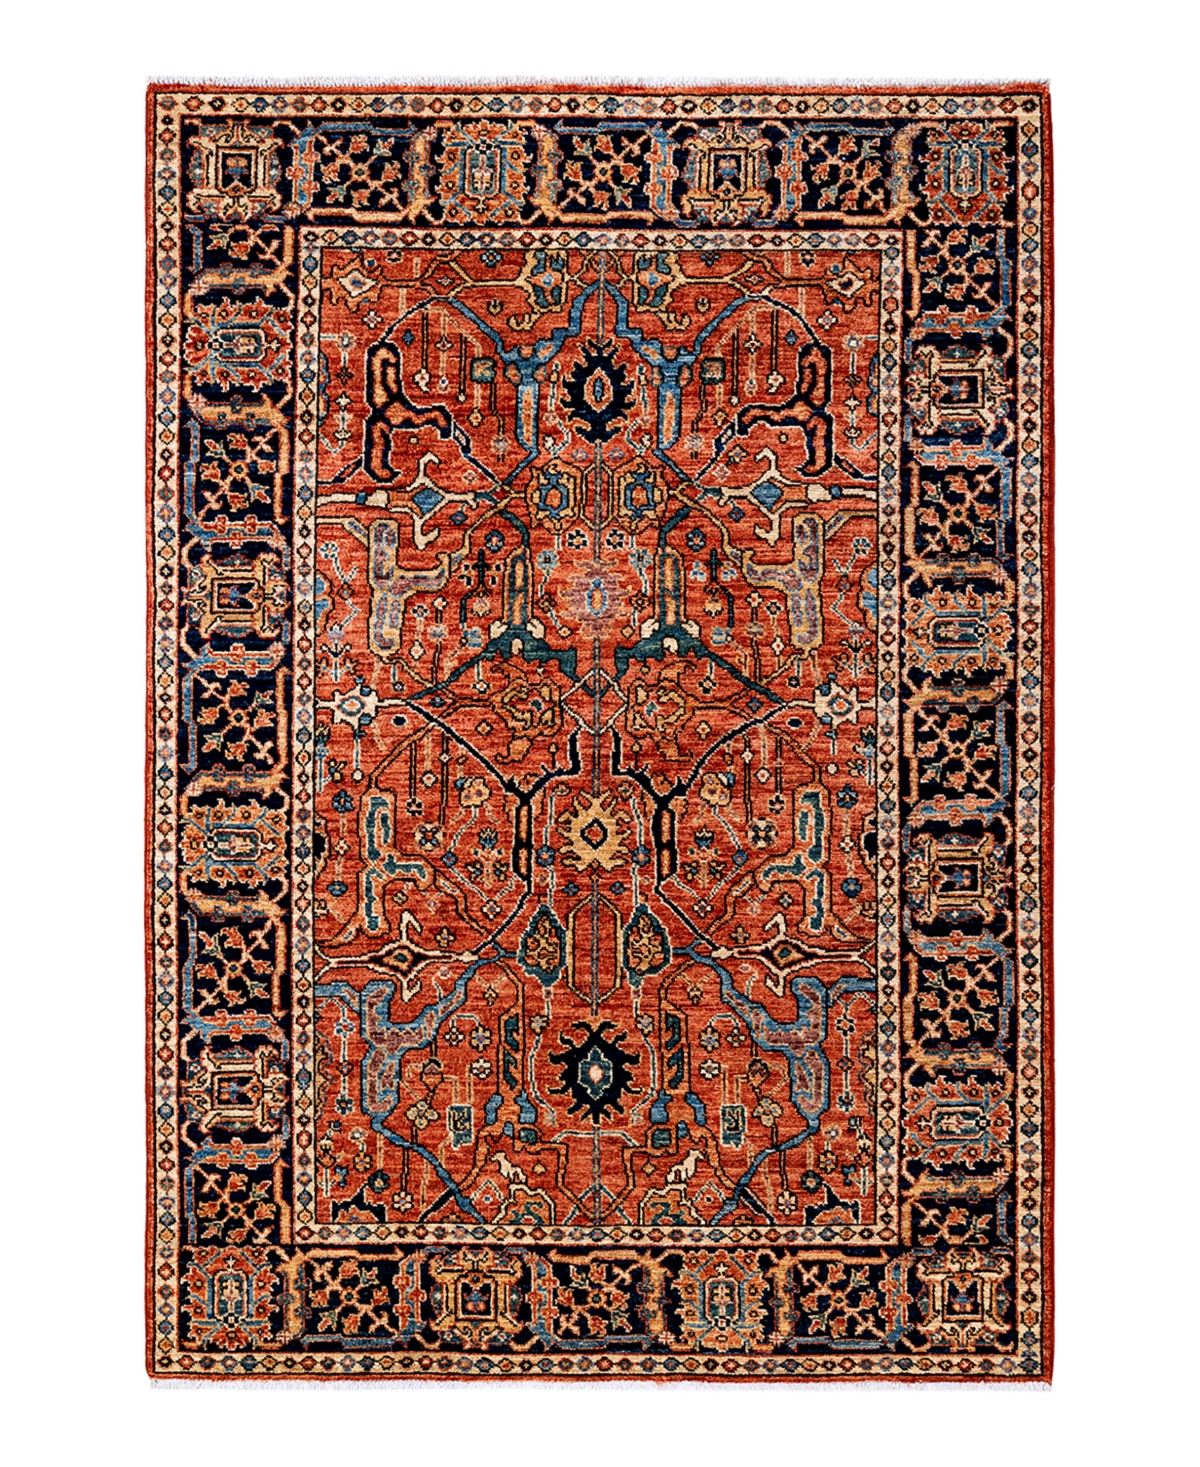 Adorn Hand Woven Rugs Oushak M1982 3'4" X 5'1" Area Rug In Beige